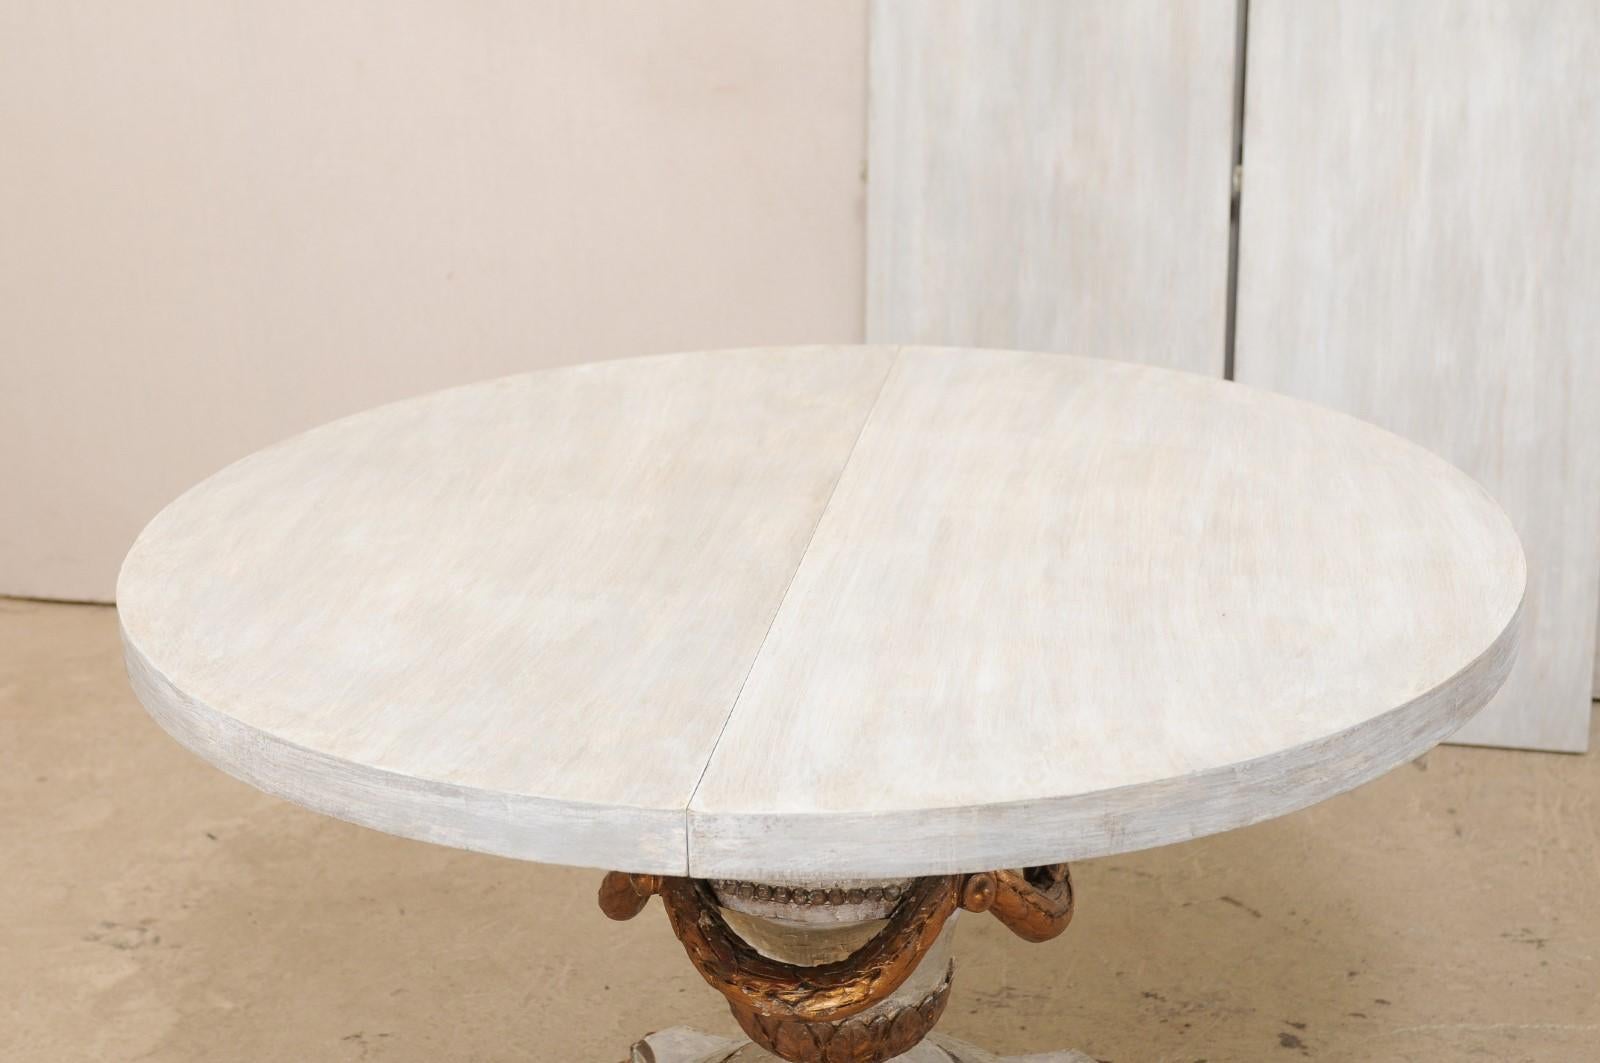 Neoclassical Style Pedestal Table with Leaves, Can be Oval or Round Shaped 5